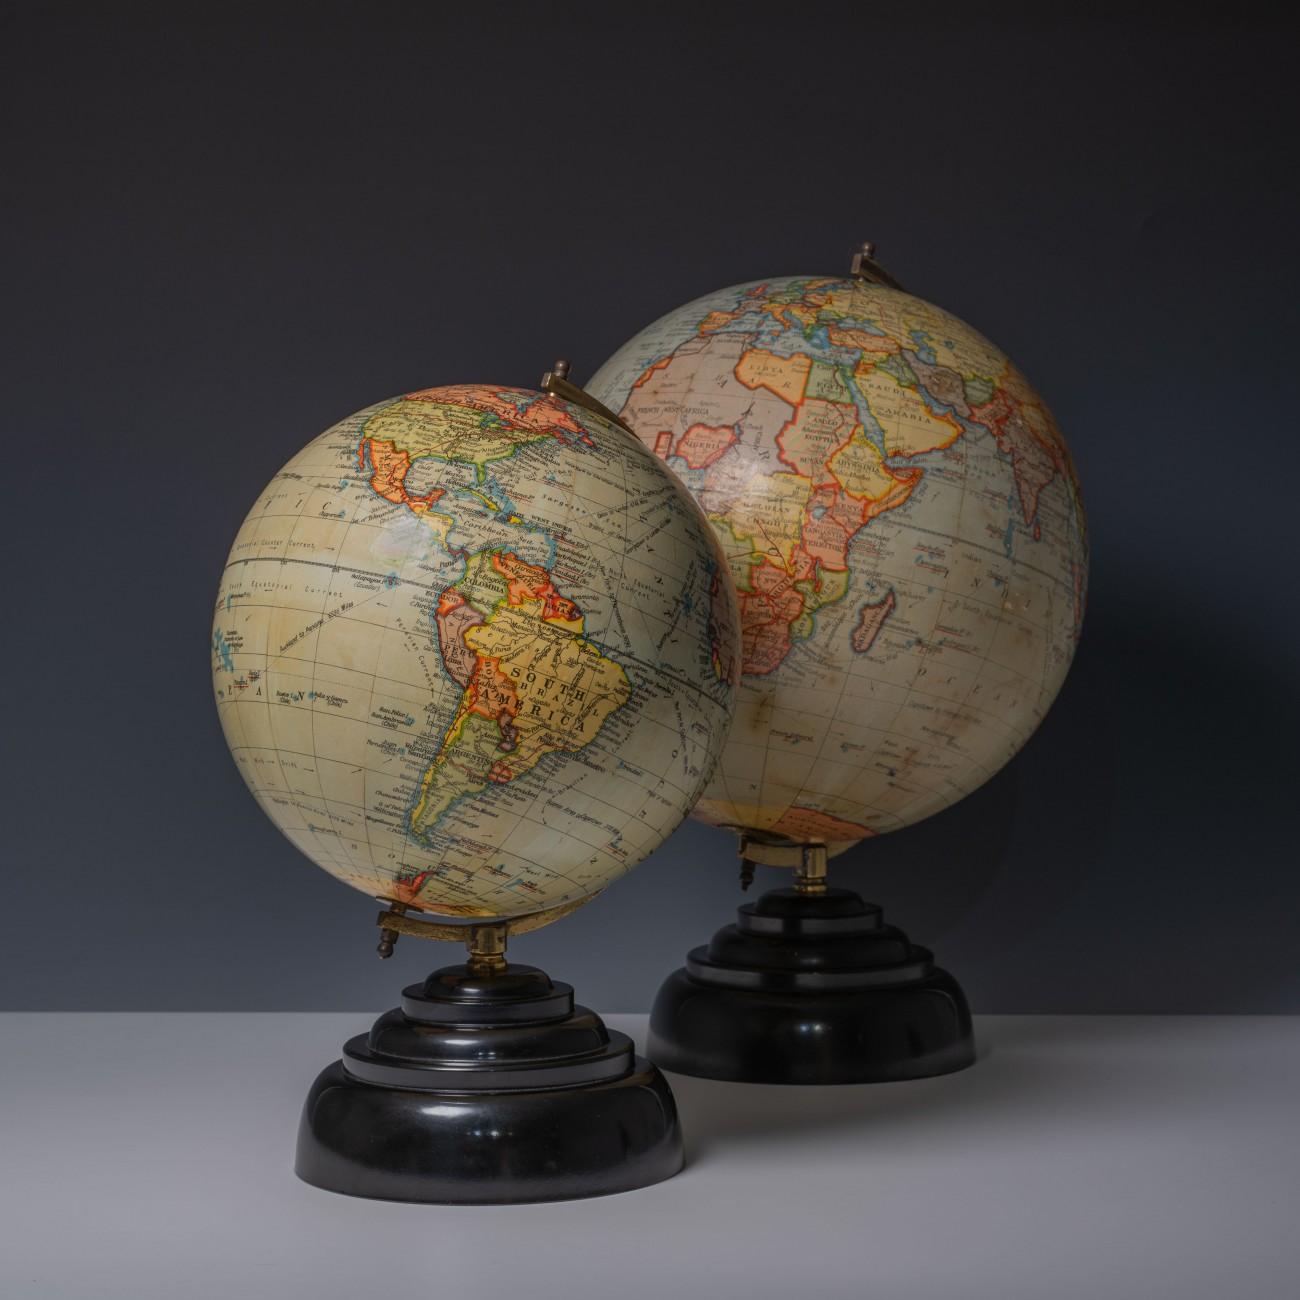 A fine 8 inch terrestrial globe by. With brass semi-meridian on a circular bakelite base, circa 1950.

Dimensions: 20 cm/8 inches (Diameter) x 31.25 cm/12¼ inches (Height)

Bentleys are Members of LAPADA, the London and Provincial Antique Dealers